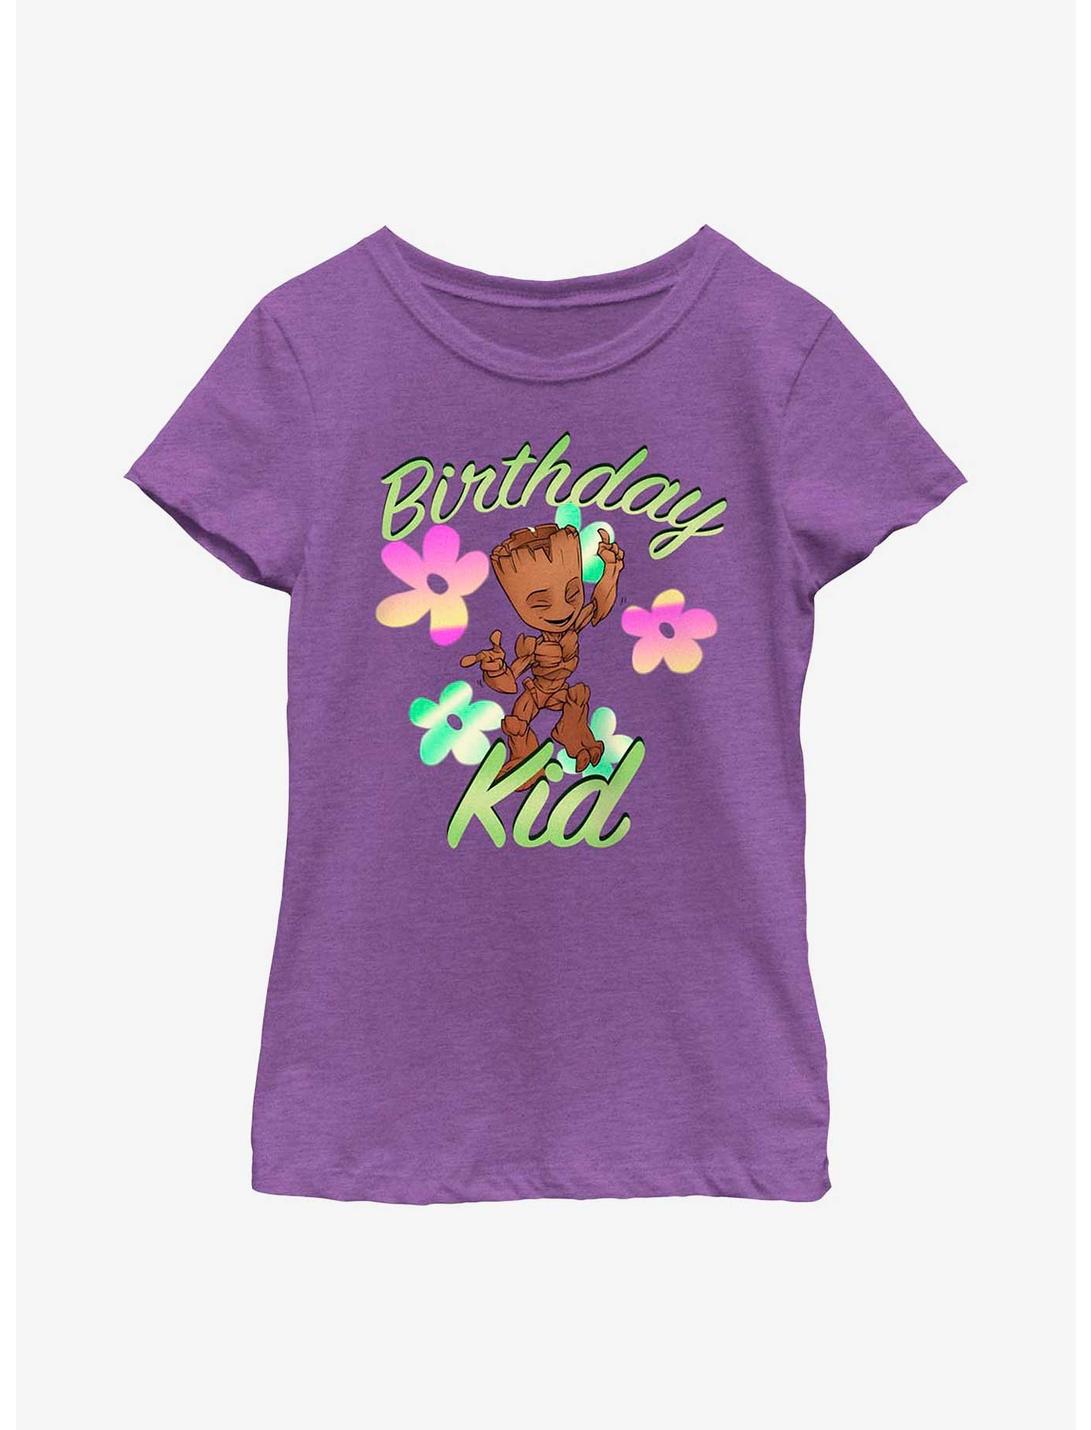 Marvel Guardians of the Galaxy Birthday Kid Groot Youth Girls T-Shirt, PURPLE BERRY, hi-res